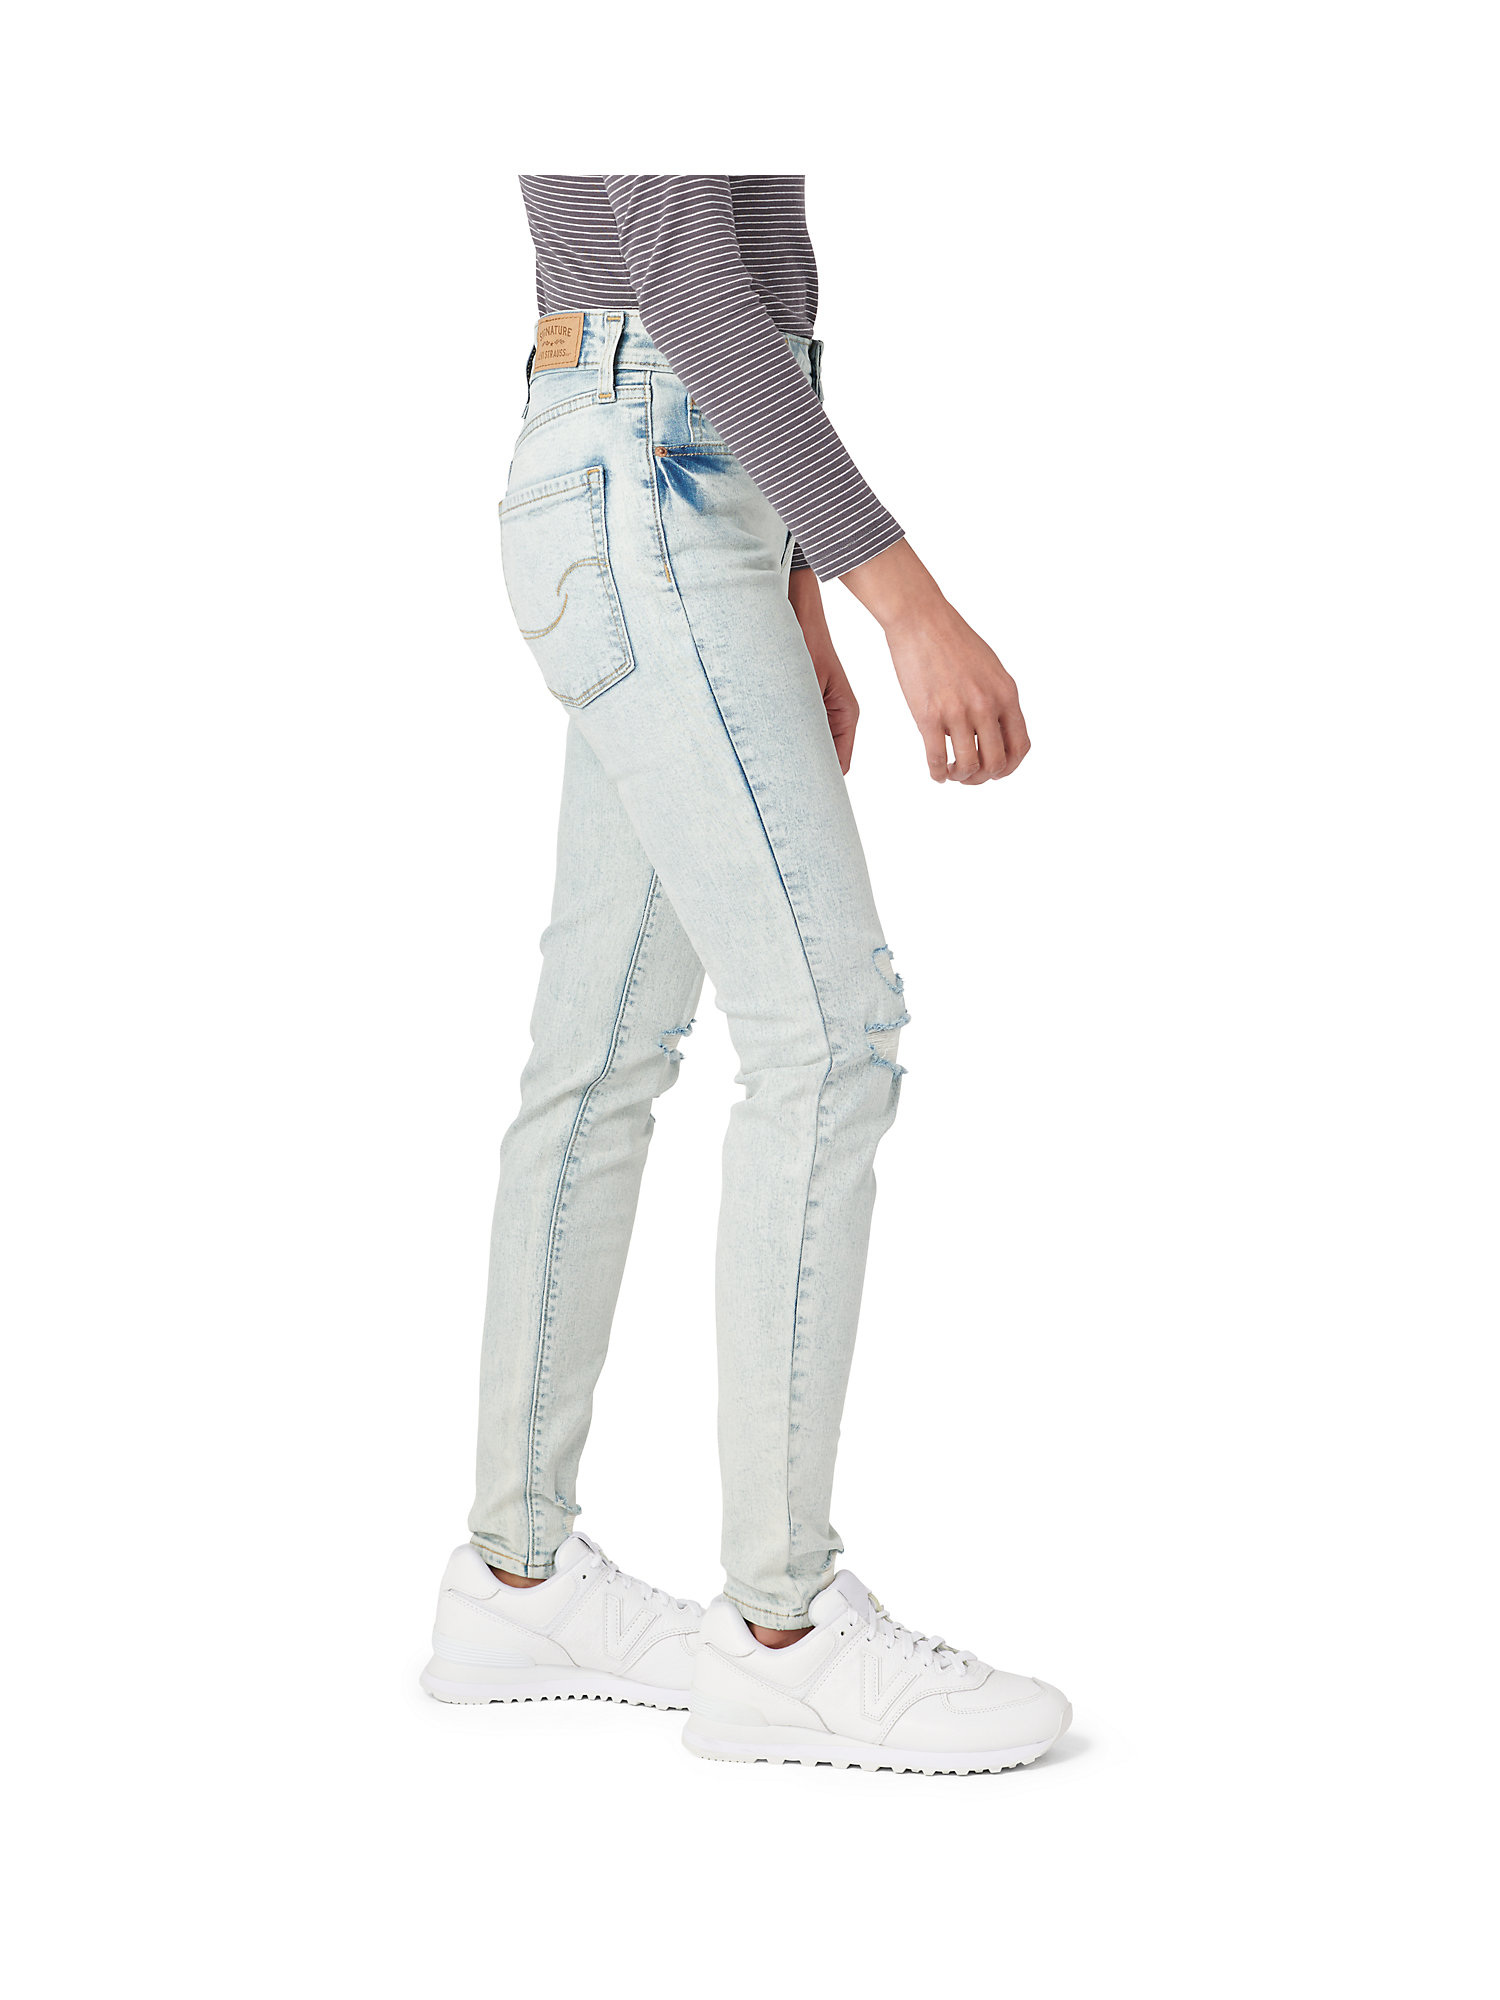 Signature by Levi Strauss & Co. Juniors' High Rise Jeggings - image 4 of 4